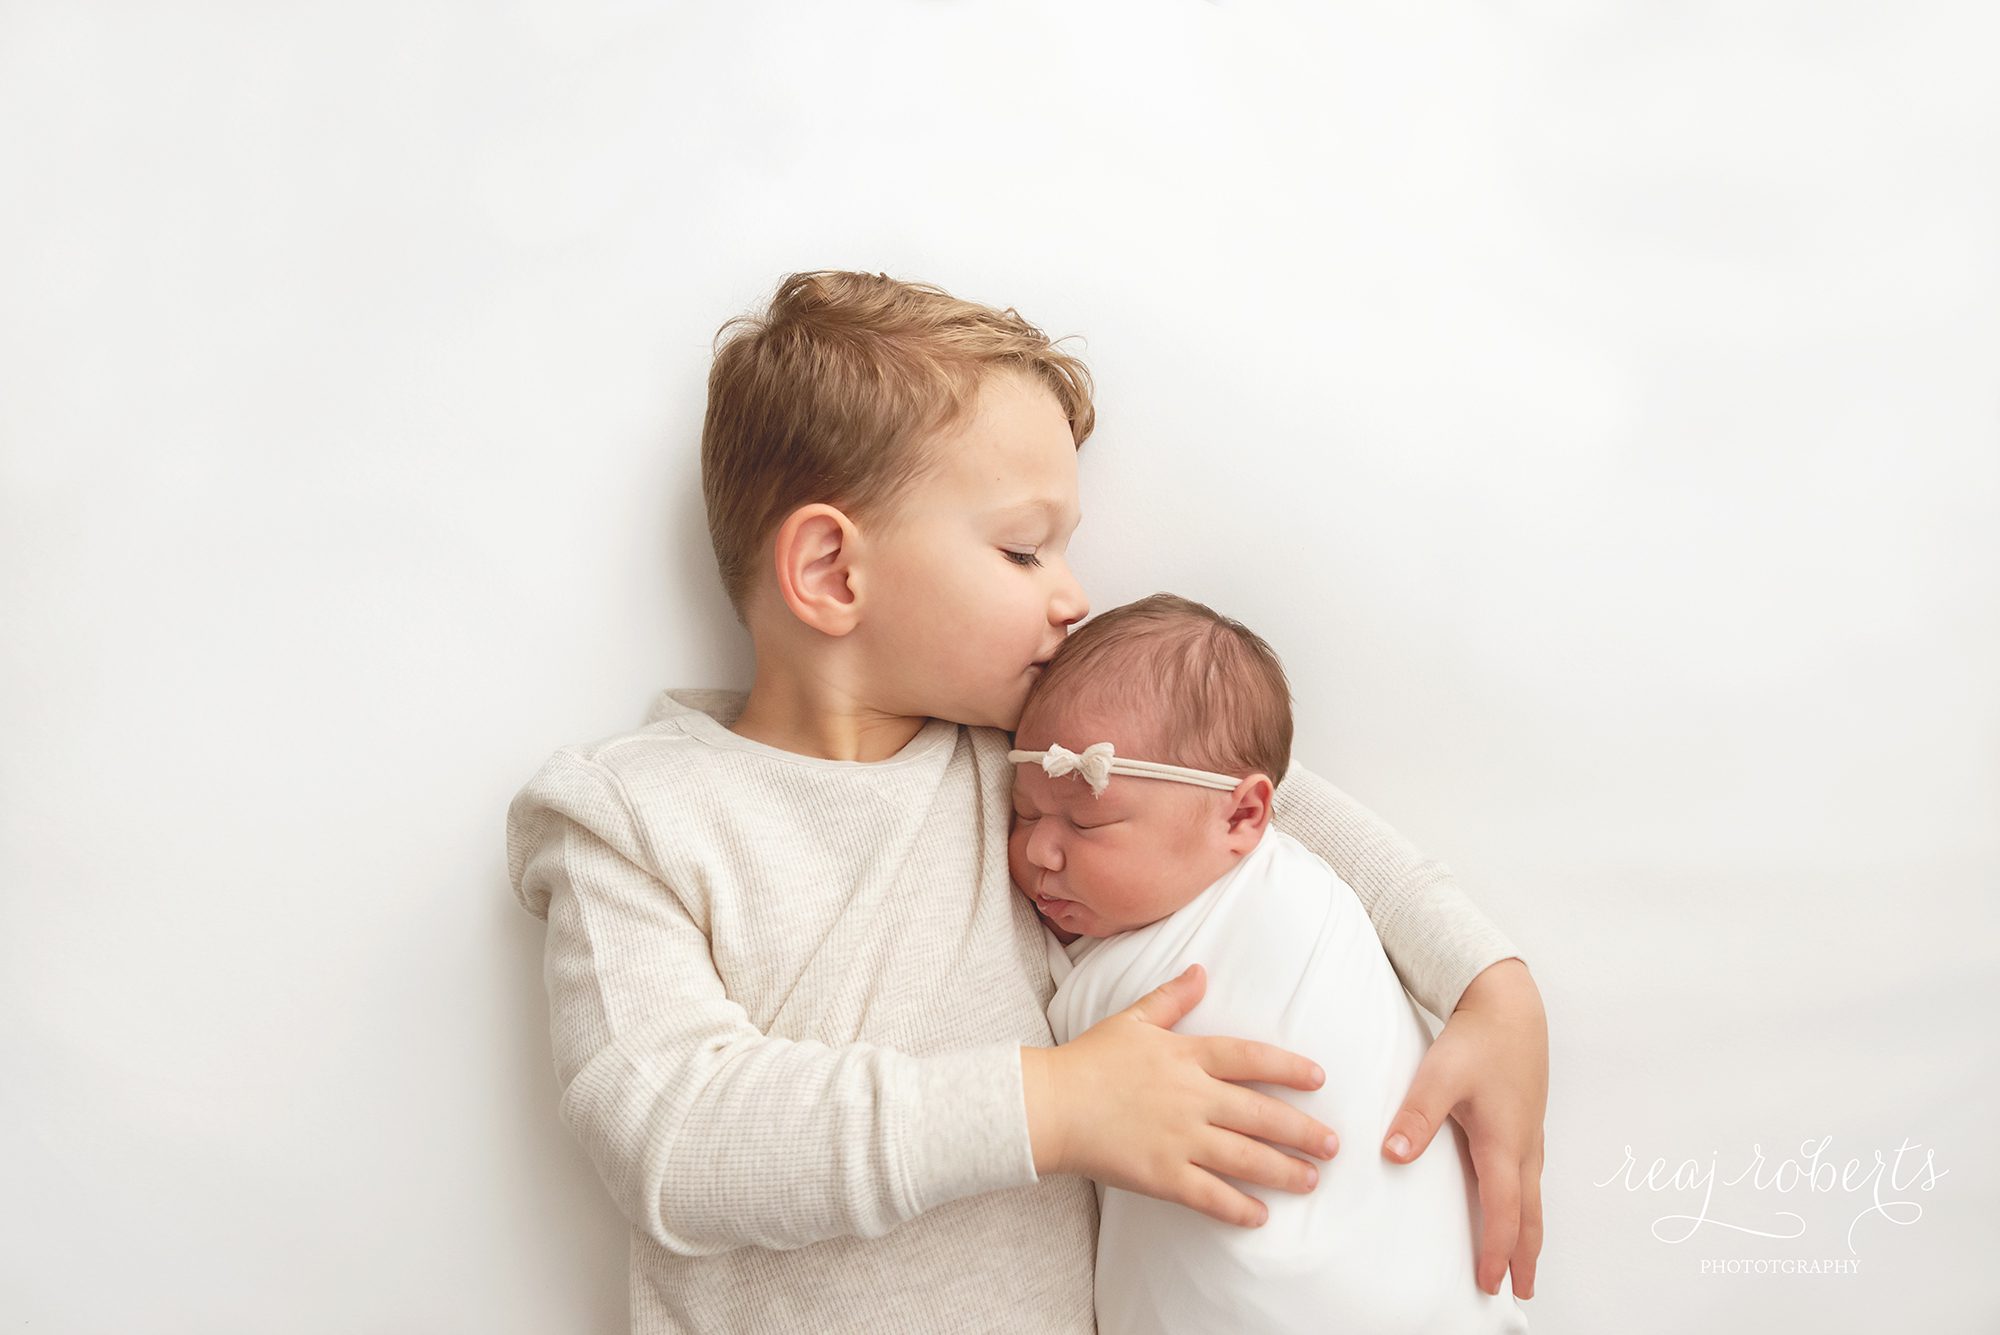 newborn baby poses with older siblings, brother kissing baby sister on head | Reaj Roberts Photography